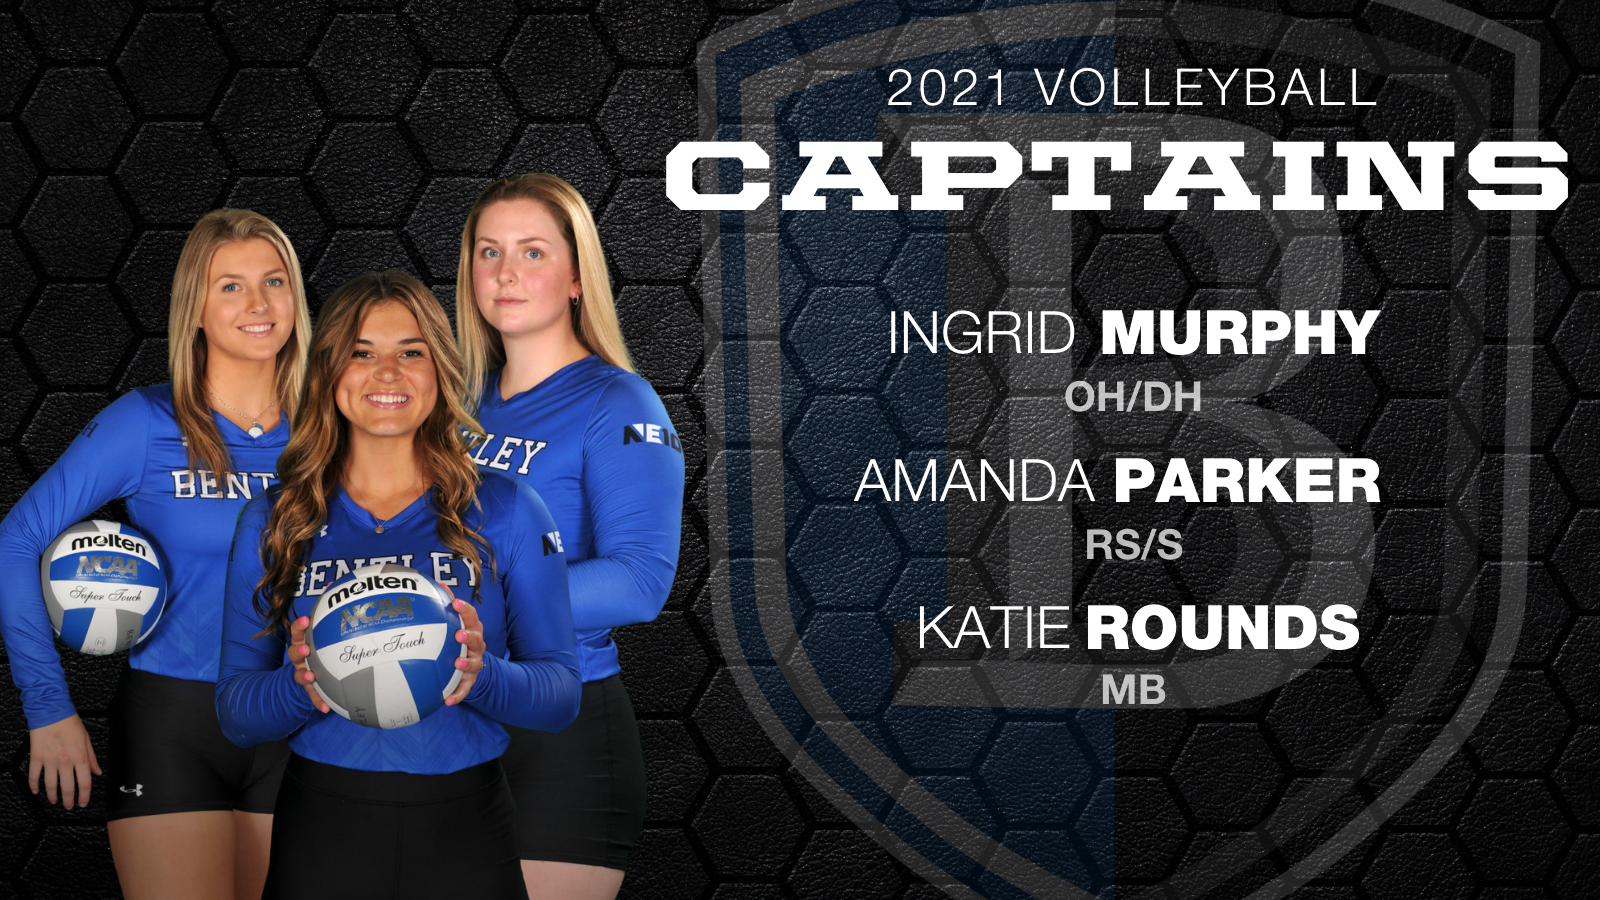 Bentley's 2021 Volleyball Captains